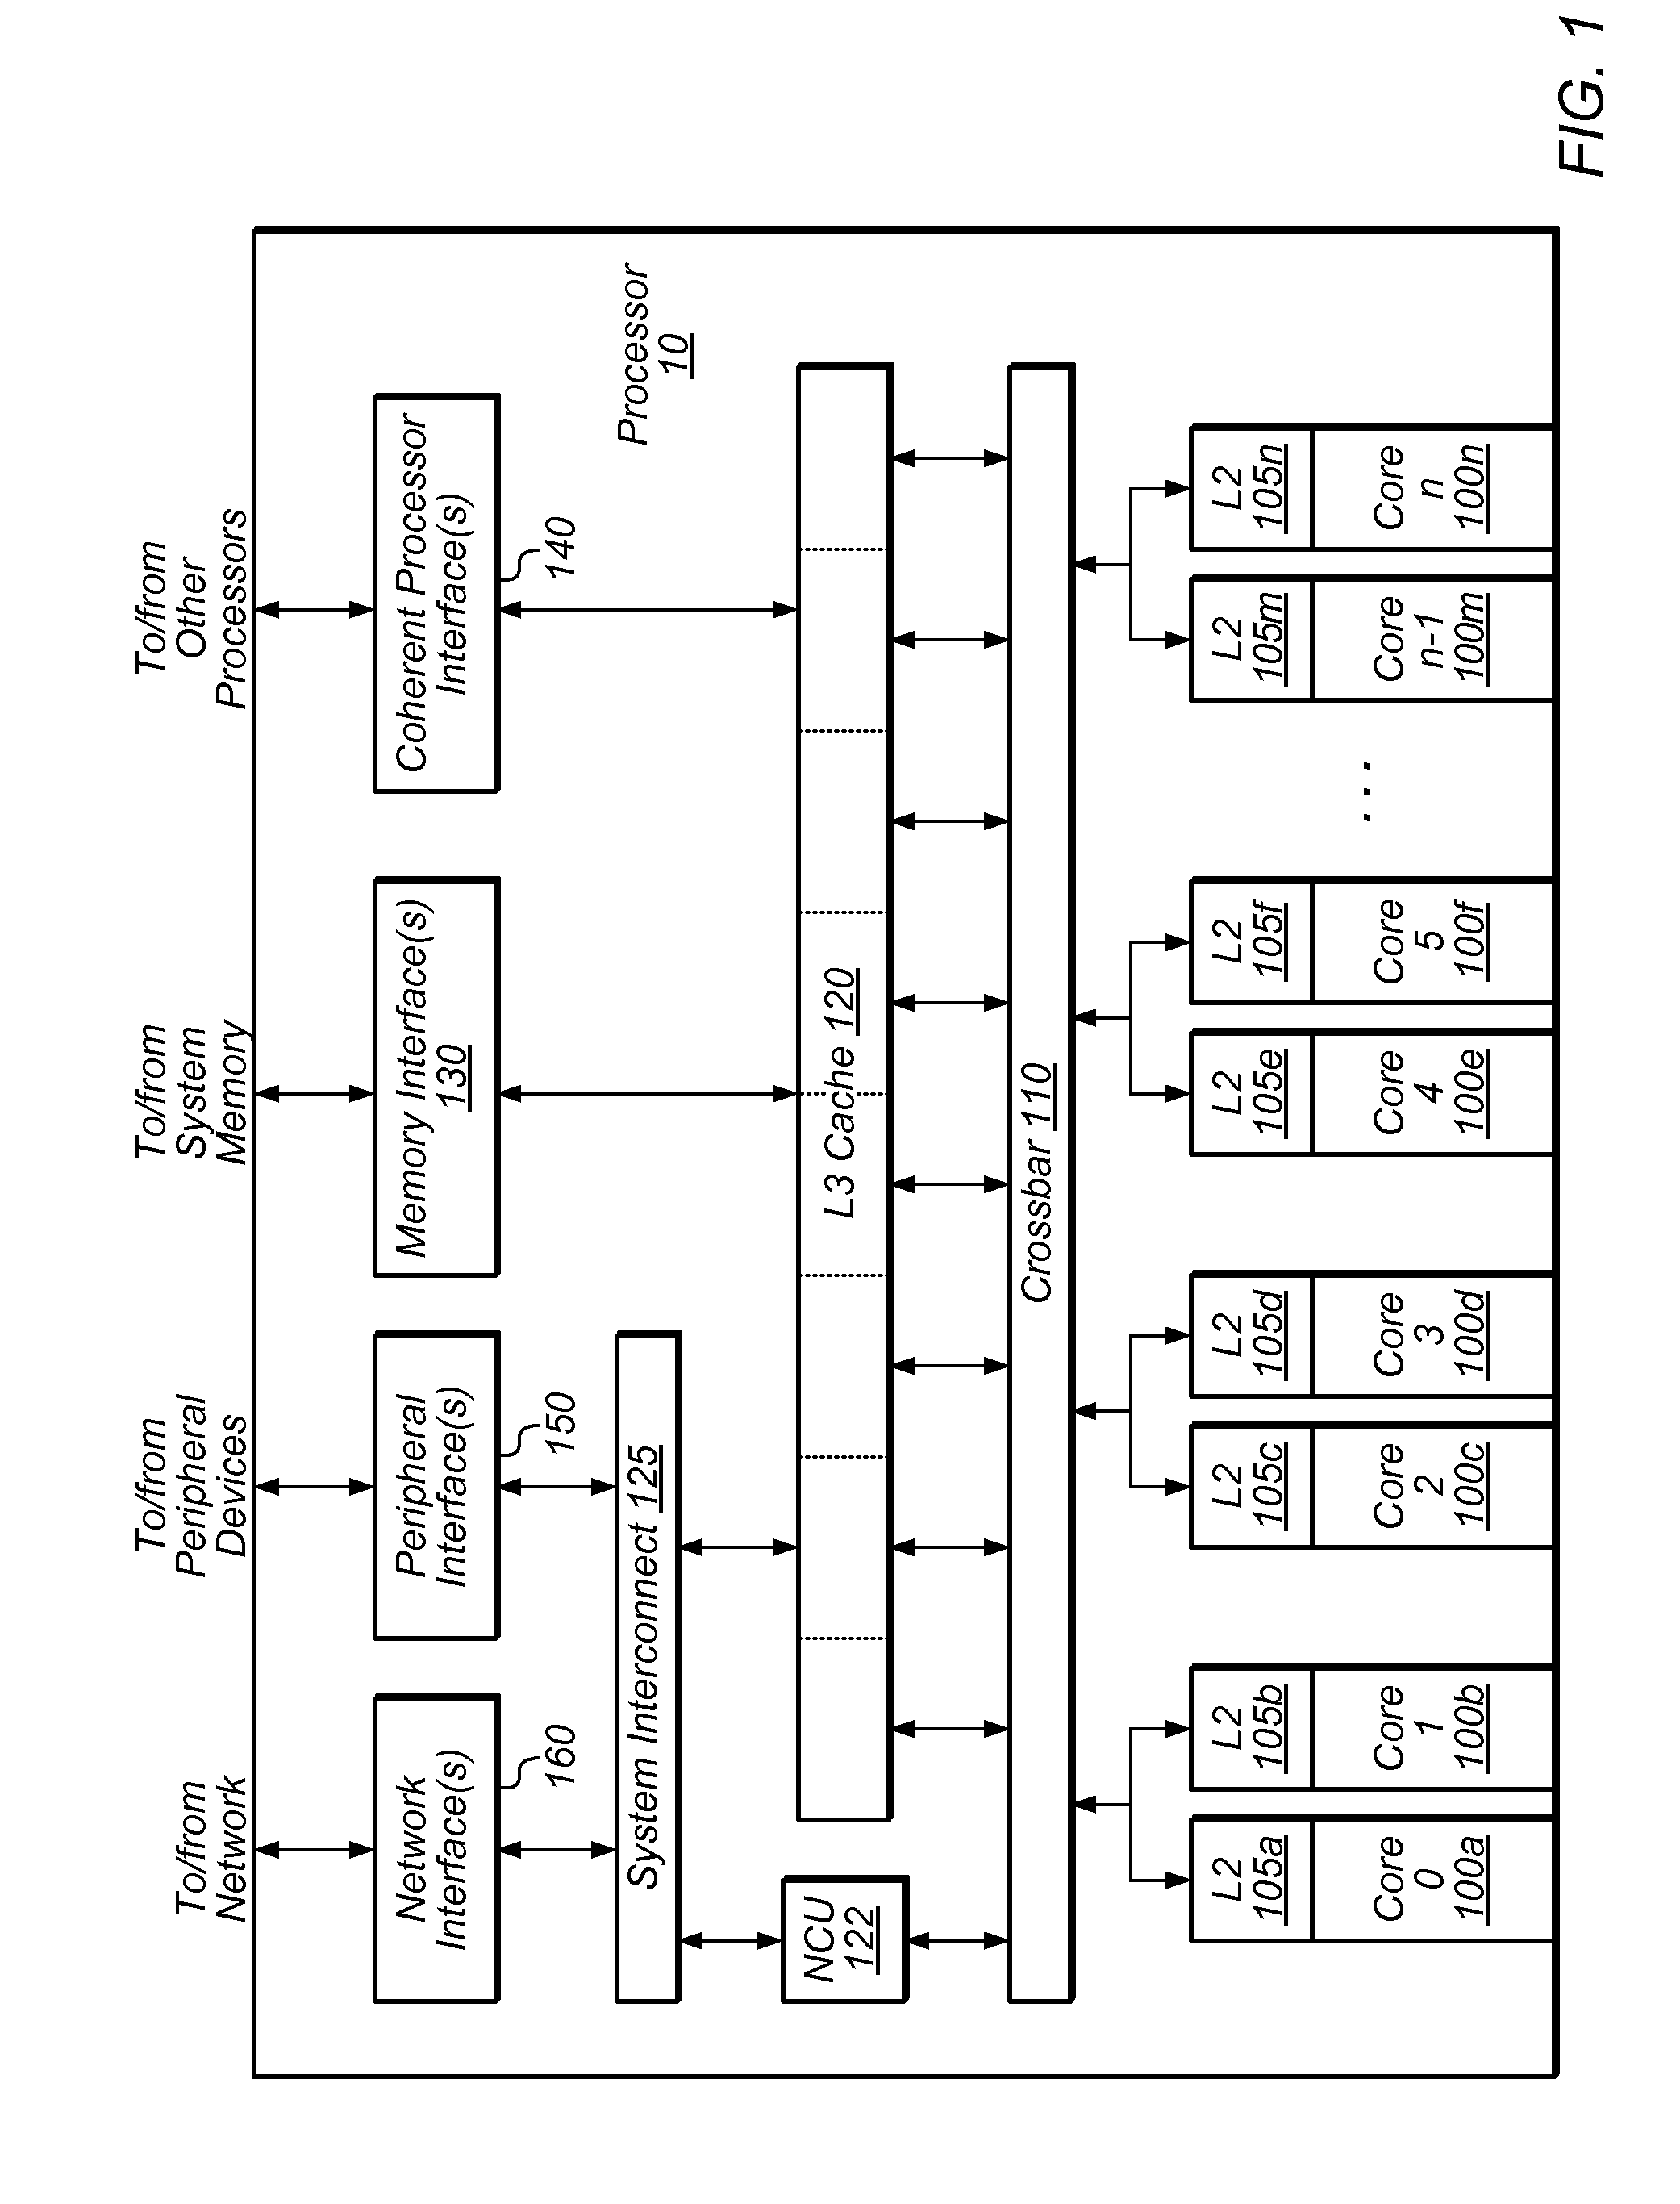 Space-efficient mechanism to support additional scouting in a processor using checkpoints